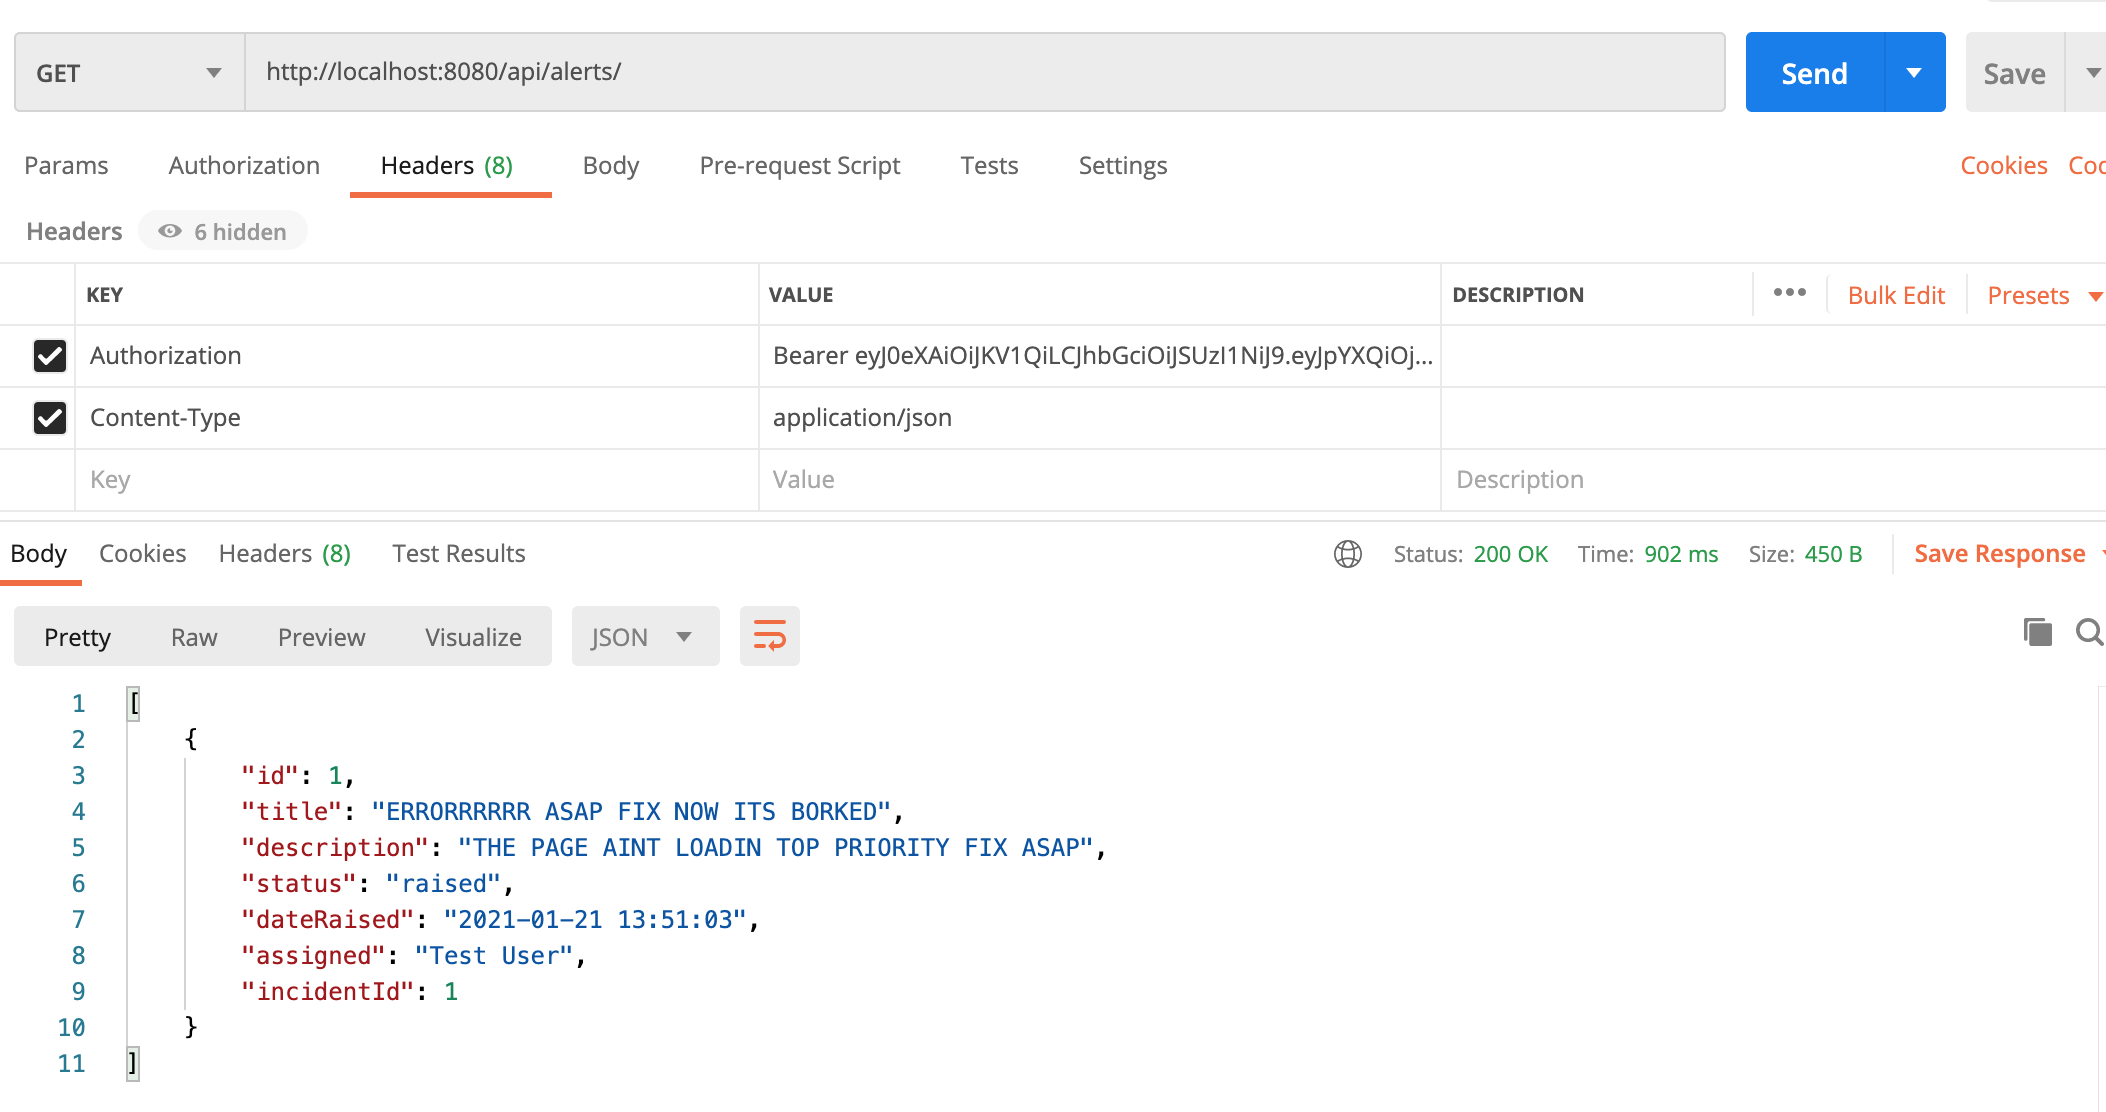 An example of listing alerts through Postman